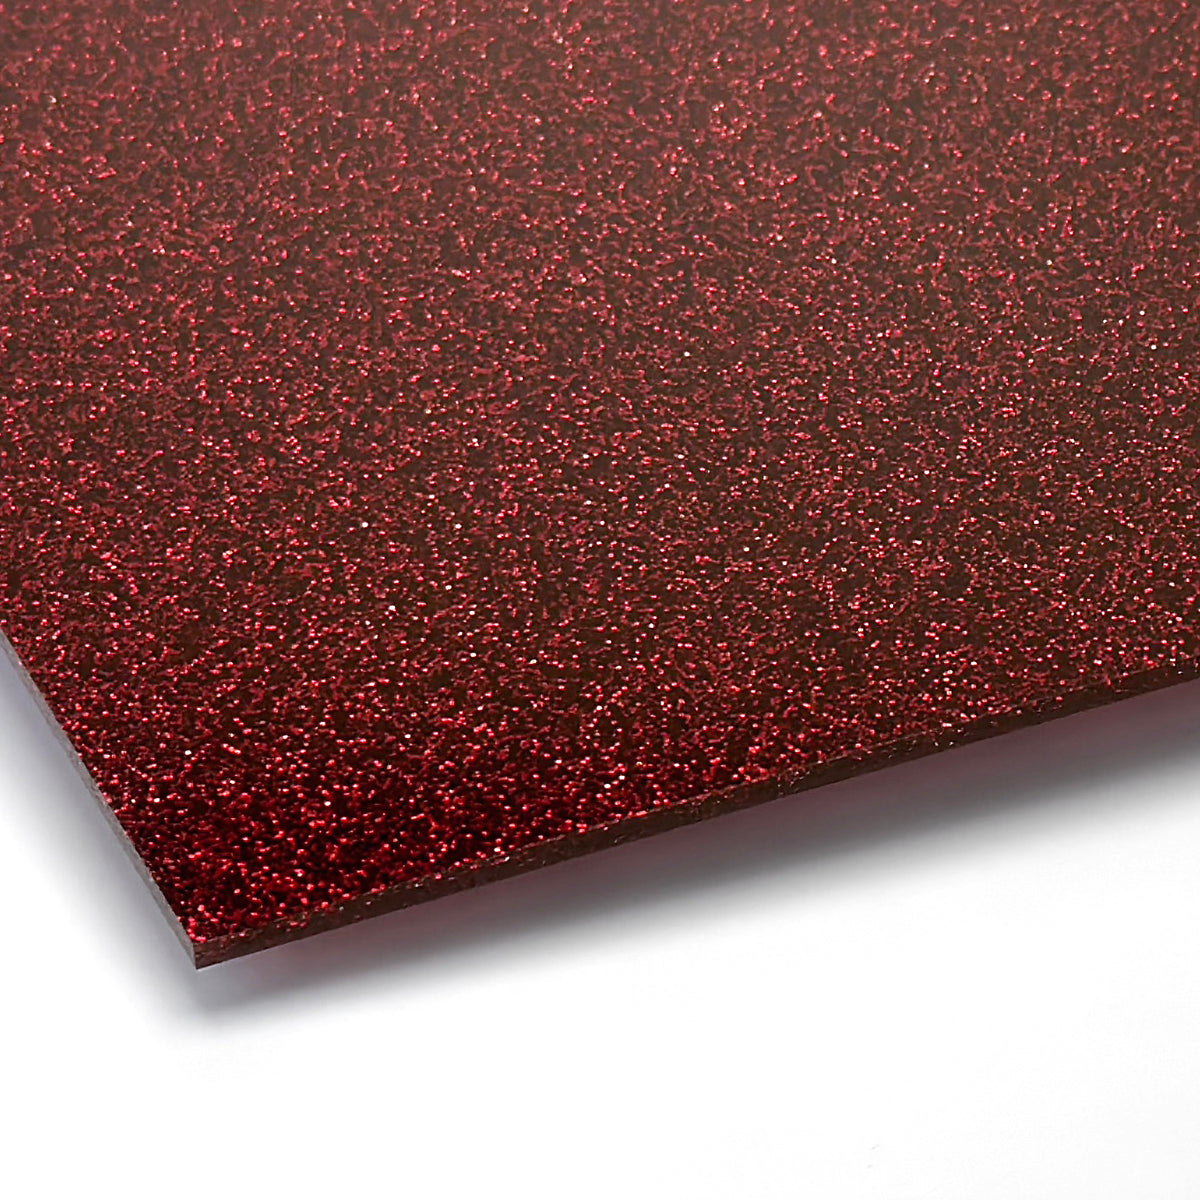 Glitter Red Acrylic with laser cutting only - 300x200mm